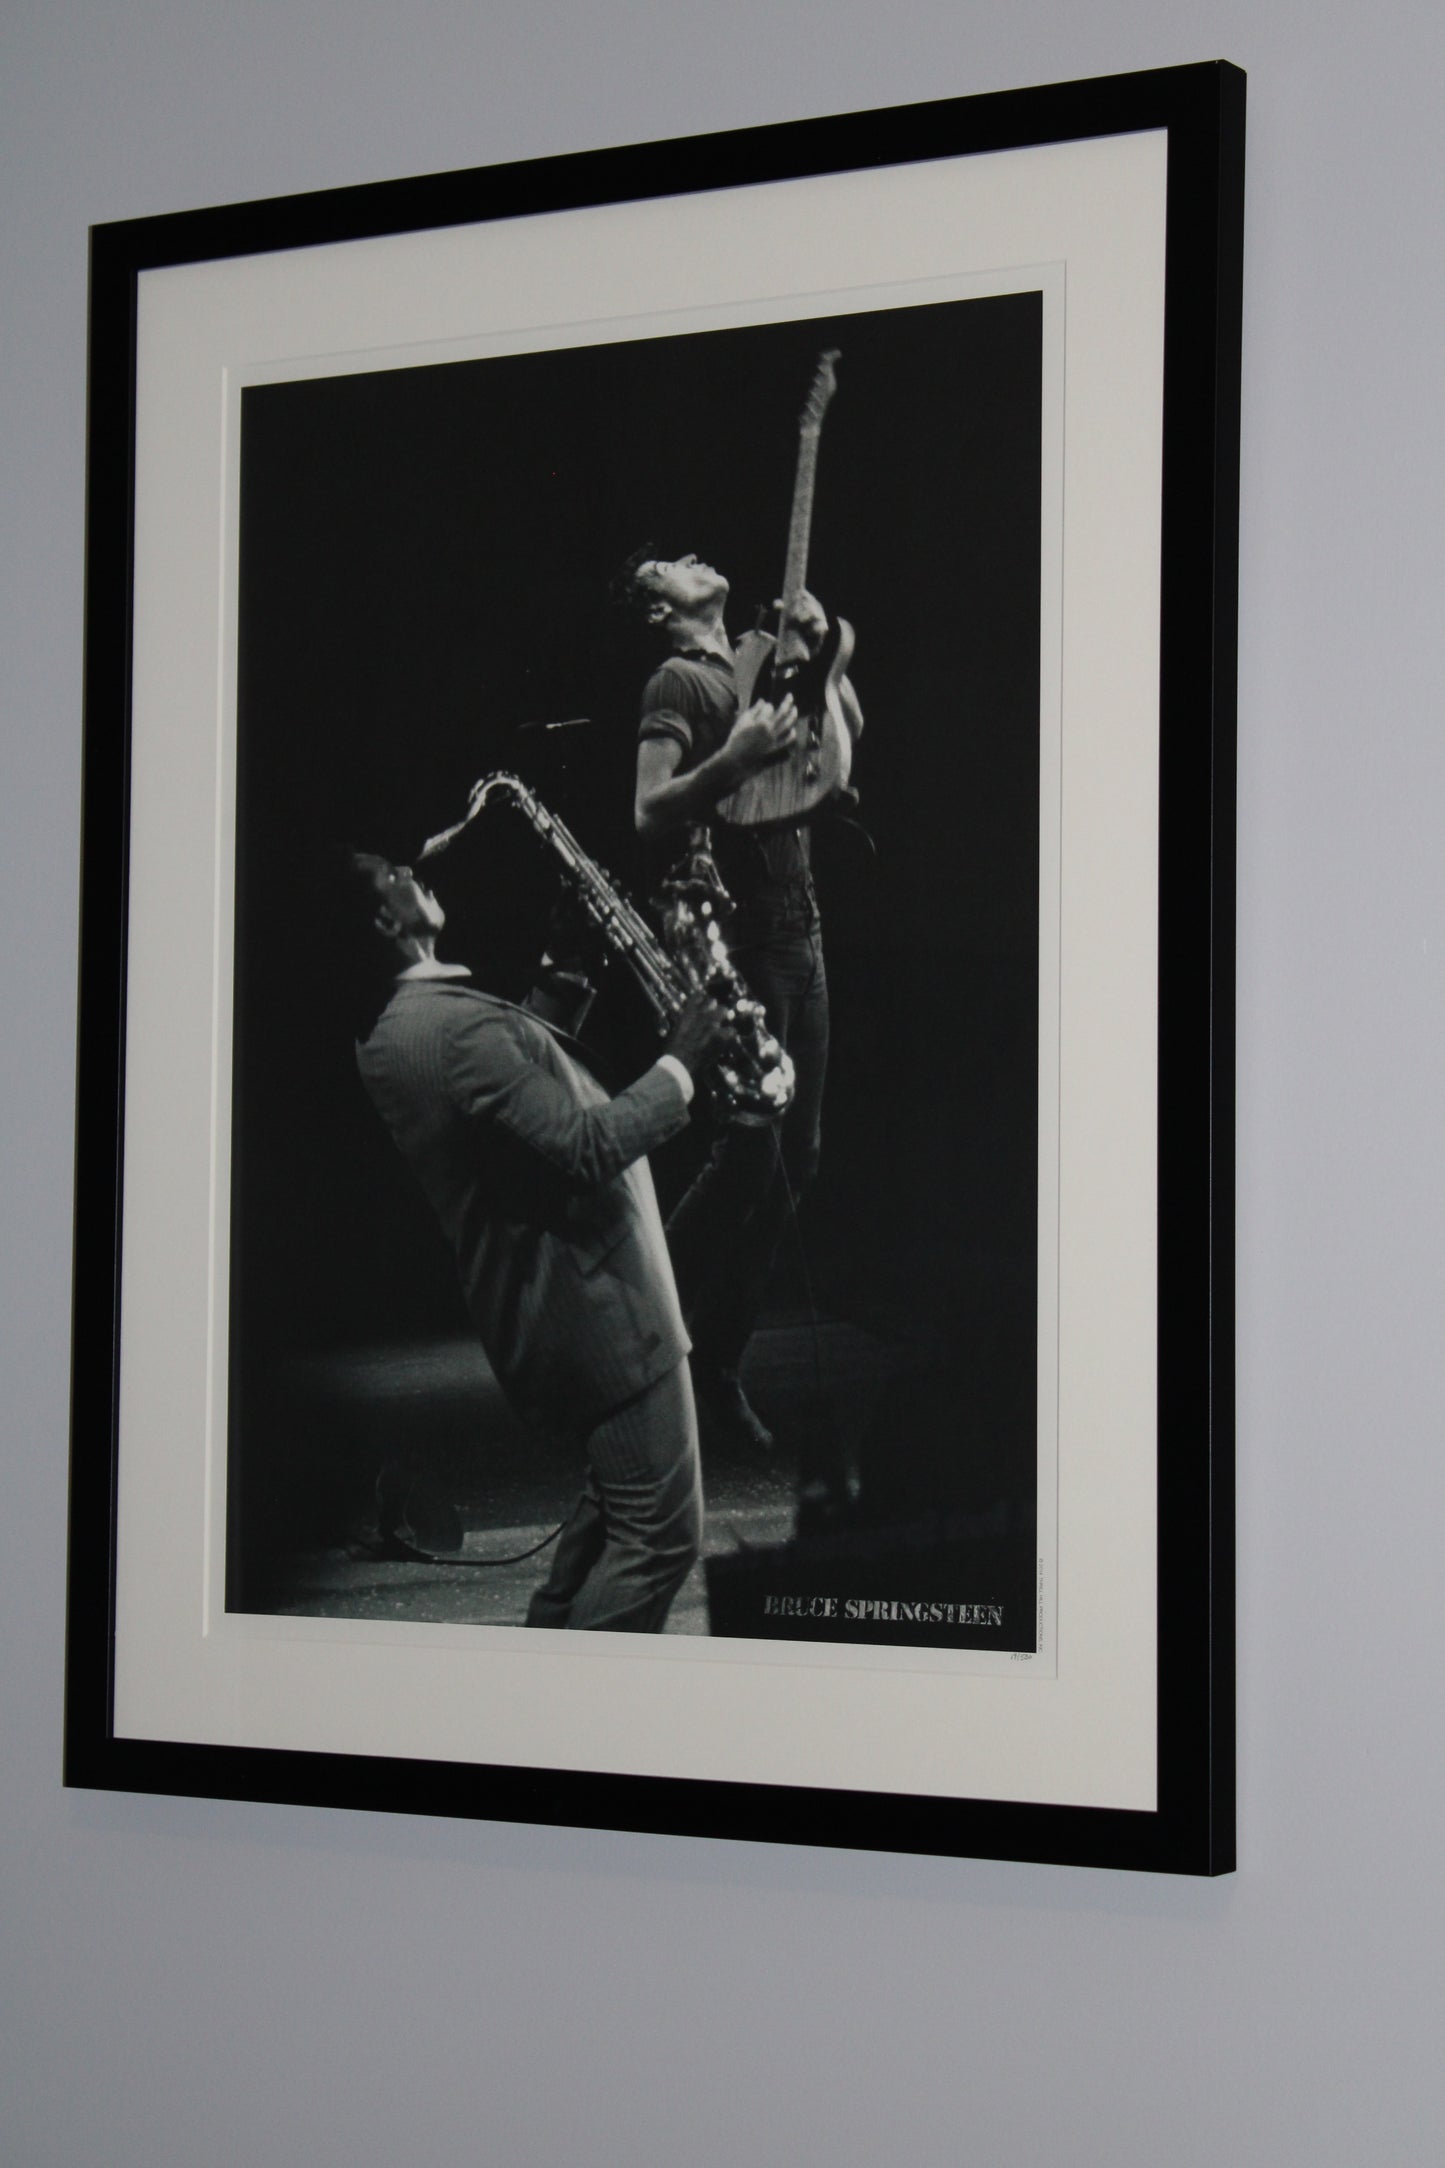 Bruce Springsteen Lithograph - #19/500 Original Bruce and The Big Man Collectible